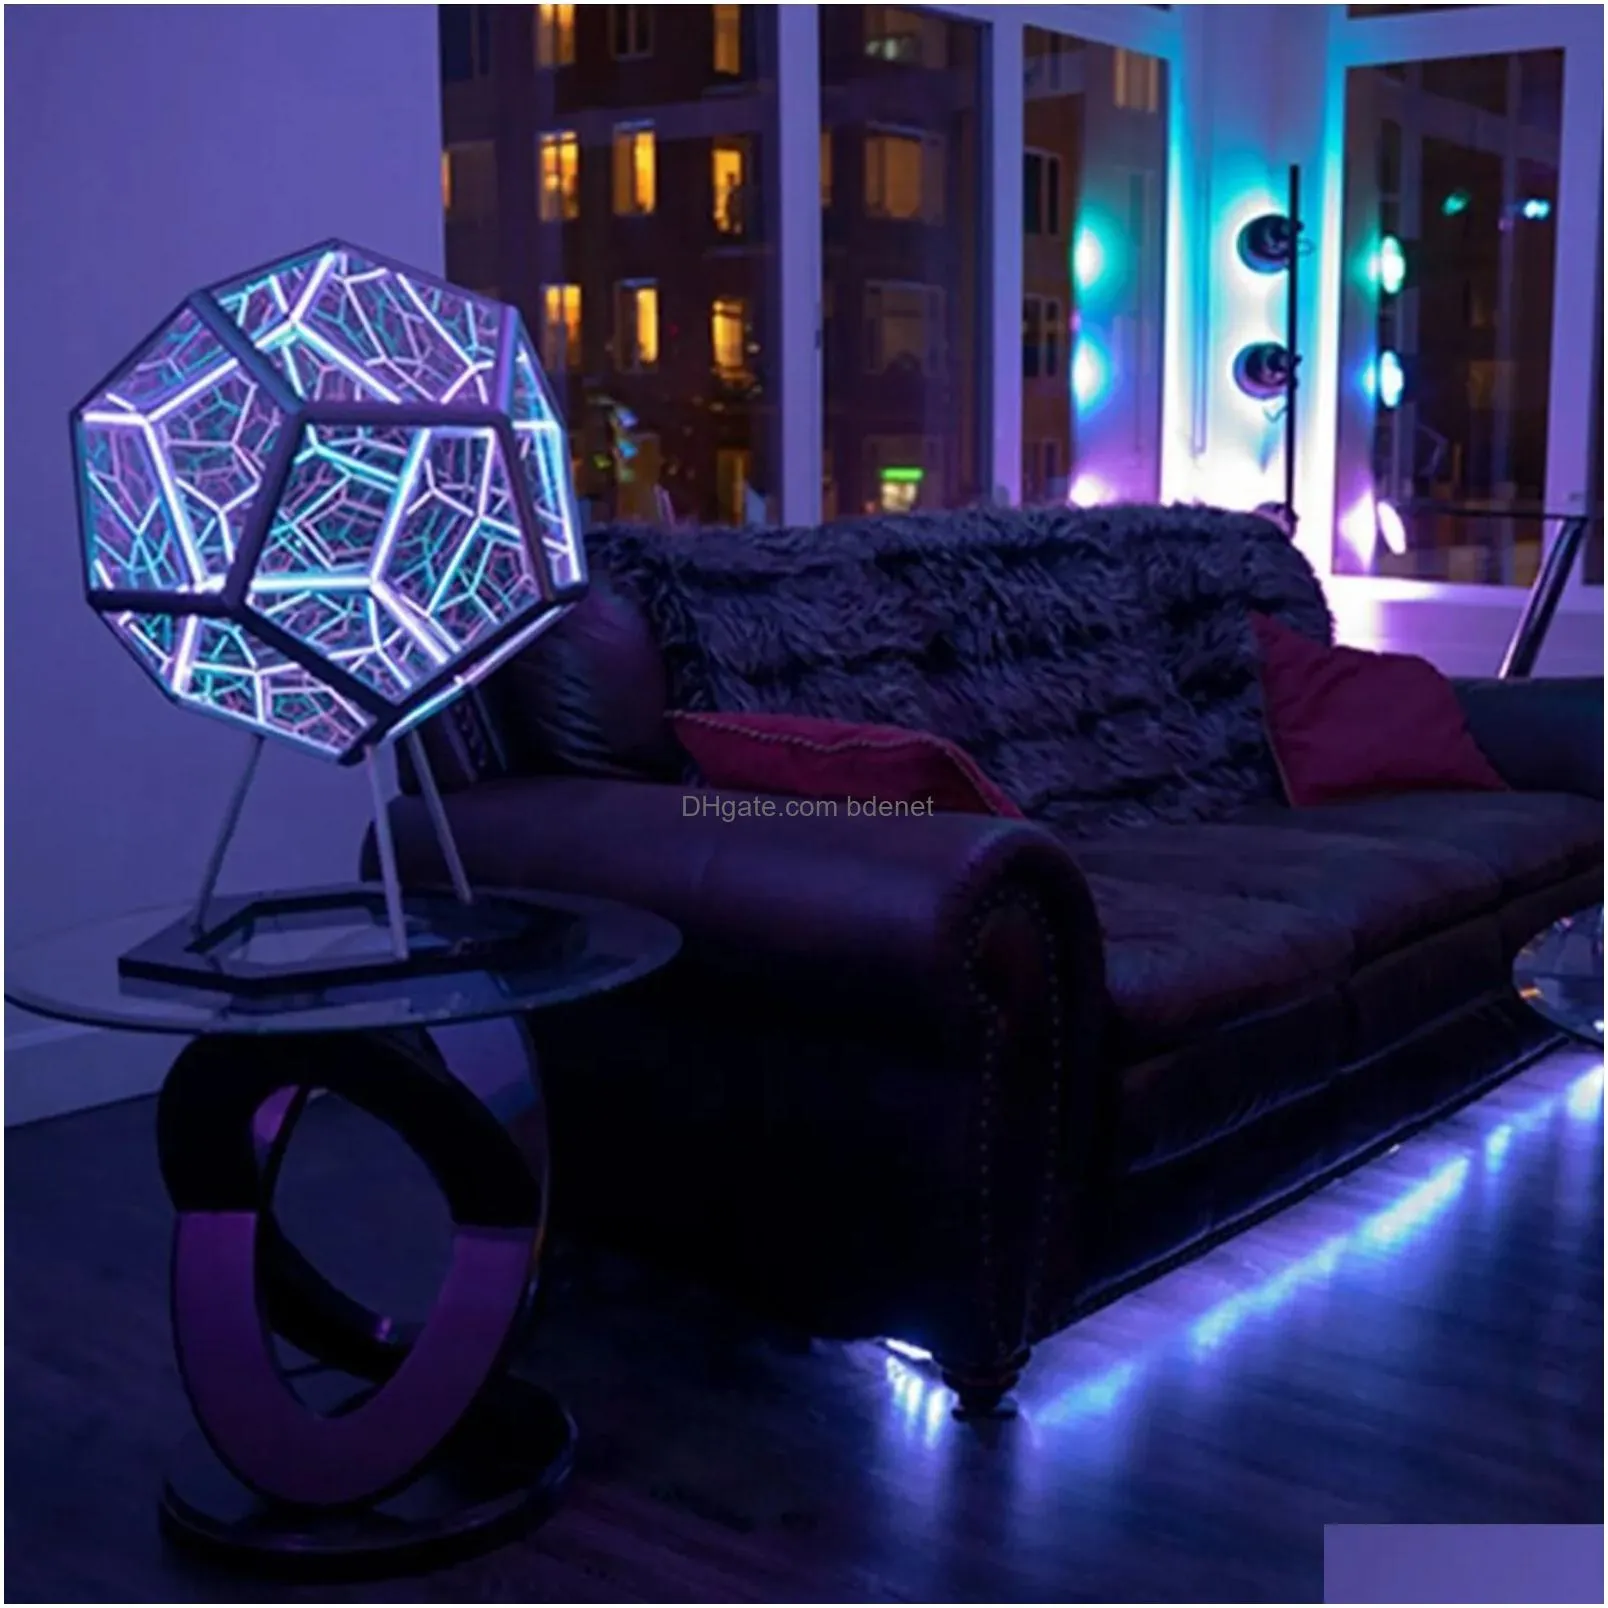 Decorative Objects & Figurines Christmas Infinite Dodecahedron Color Art Light Usb Charging Lamp Home Desktop Decoration Aesthetic Roo Dhnoi